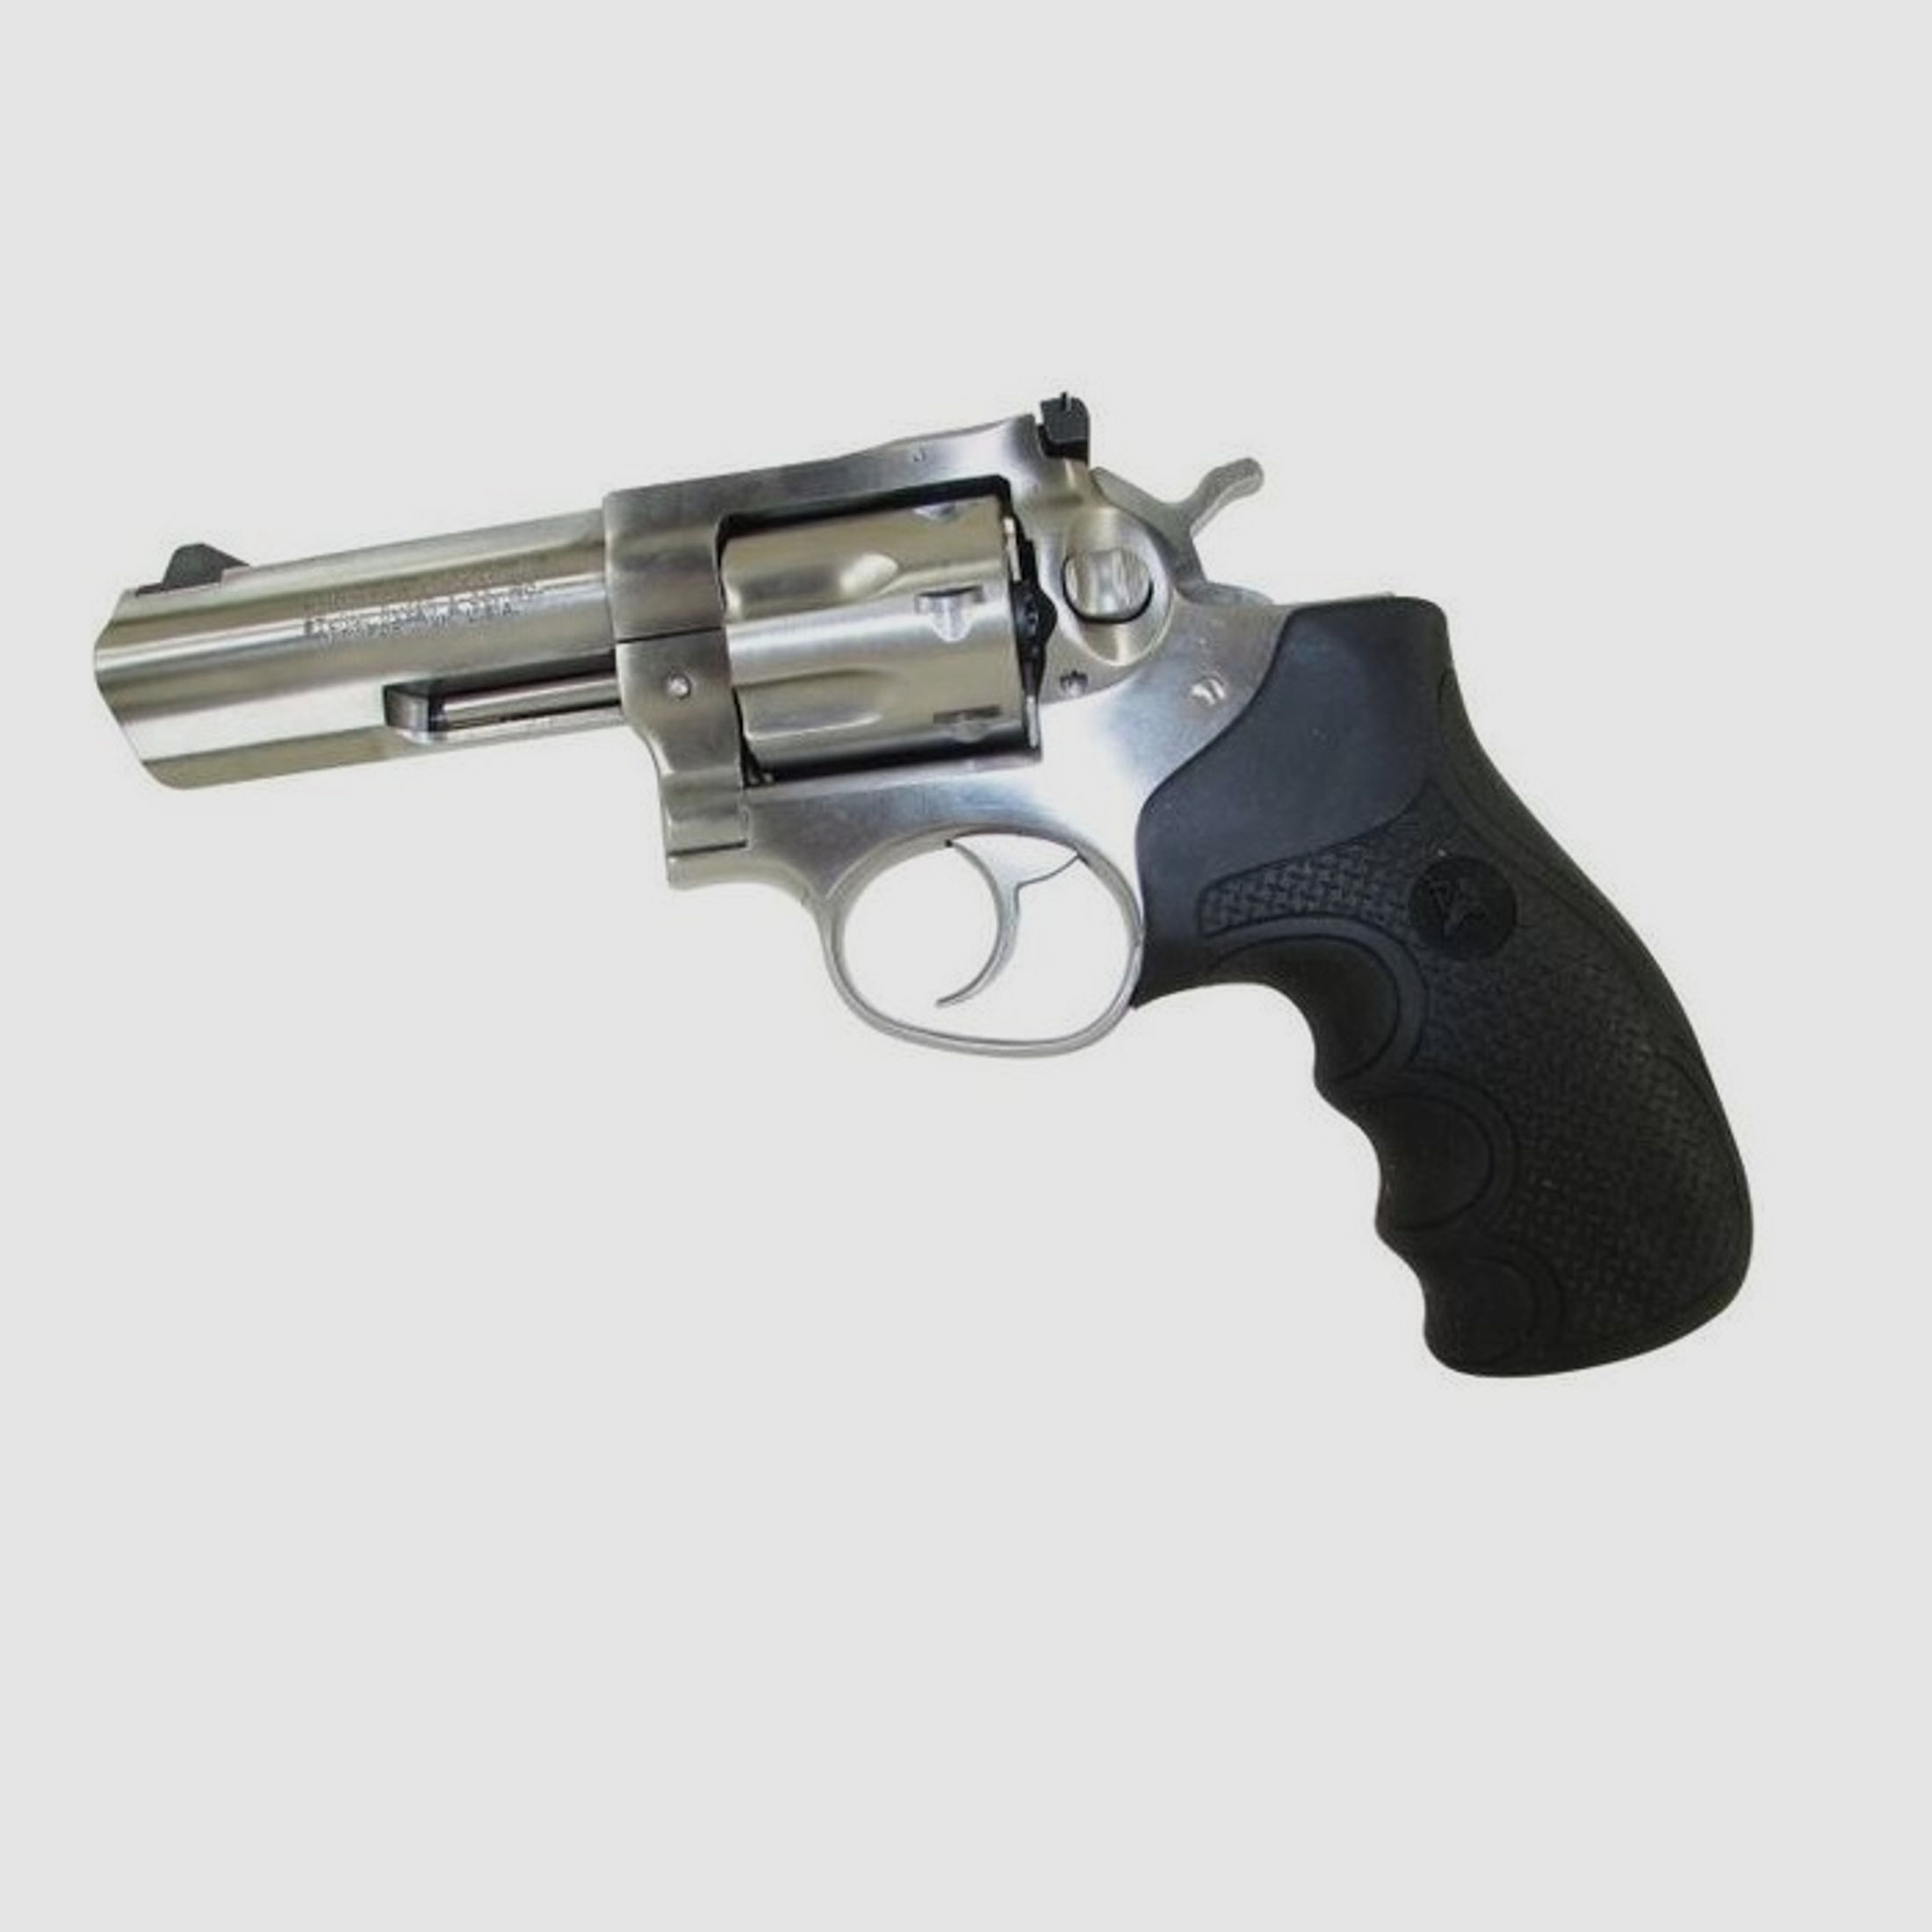 Pachmayr Griff Diamond Pro Ruger GP100